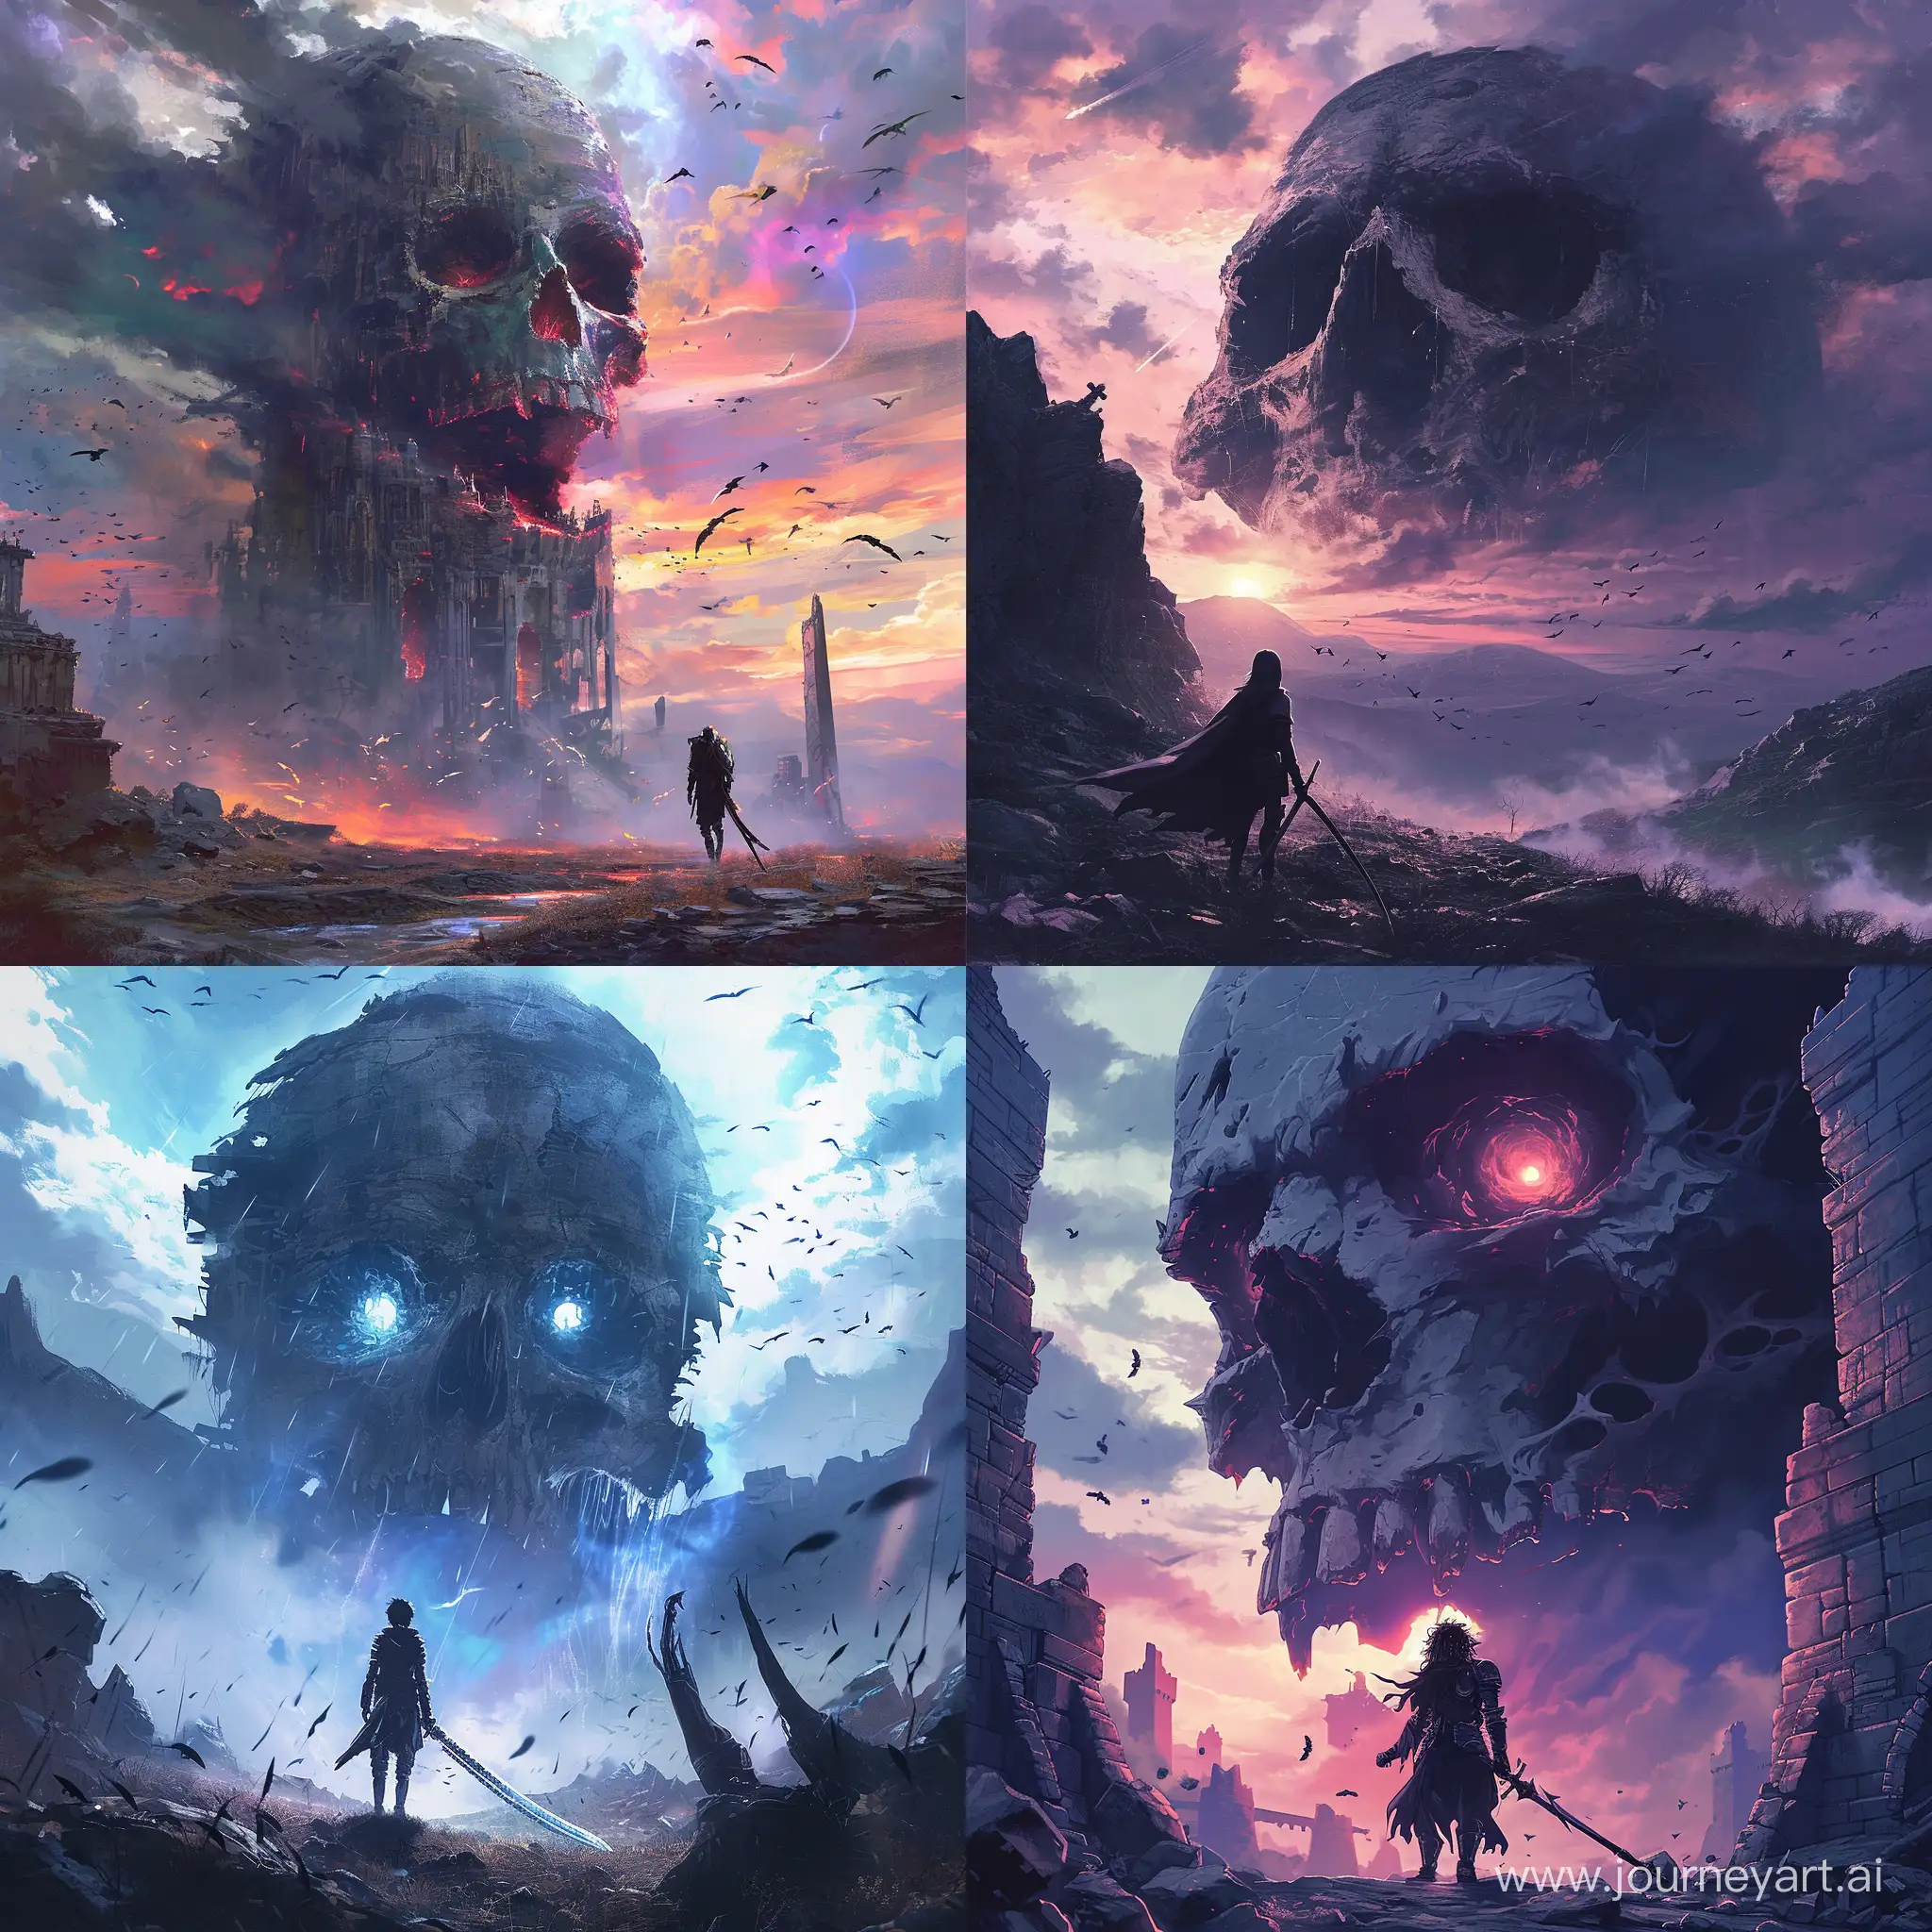 Anime::2 kawaii:2, a warrior stands in a desolate land with a giant skull looming above them. The warrior is equipped with a sword and shield, there is a skull with glowing eyes in the background. The scene is set at dusk, there are crows flying around, Anime style, kawaii, высокое разрешение, высокая чёткость, чёткое изображение, микро детализация, высокая детализация, ультра реализация, максимальная детализация, много деталей, глубокие детали, детальное изображение, четкие линии. --v 6